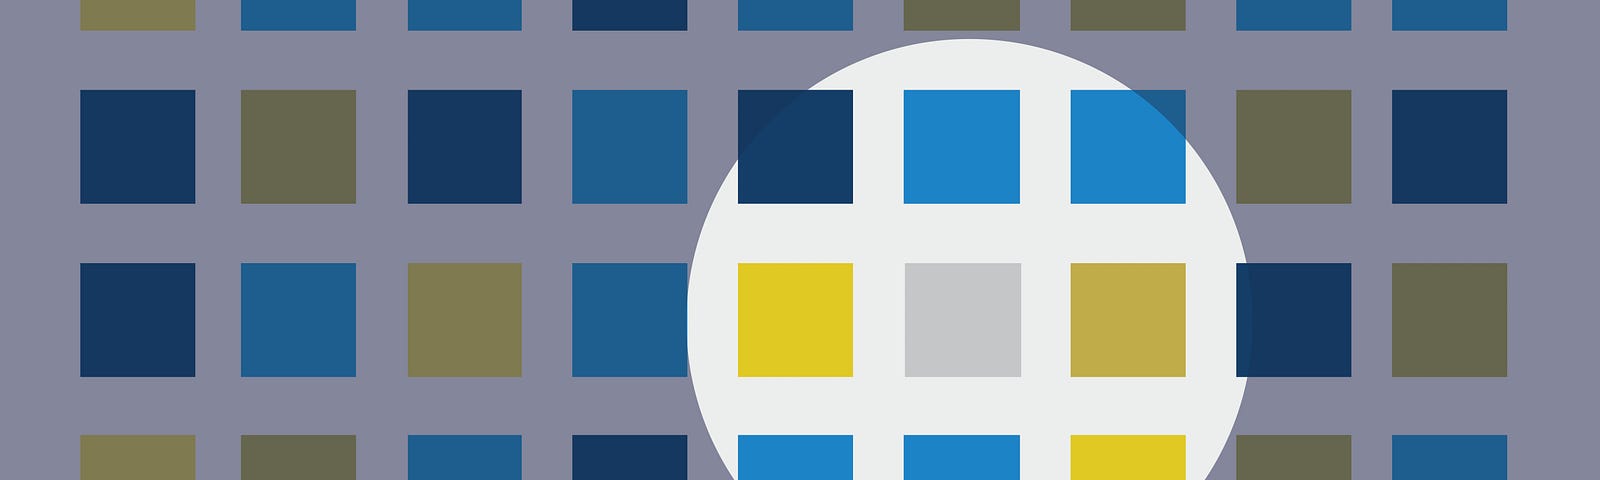 Dark blue, medium blue, and gold squares are evenly spaced on a white background. There is a shadow over most of them, but there’s a circle spotlight over about nine of the squares. This represents the USDS value of Find the truth, tell the truth.